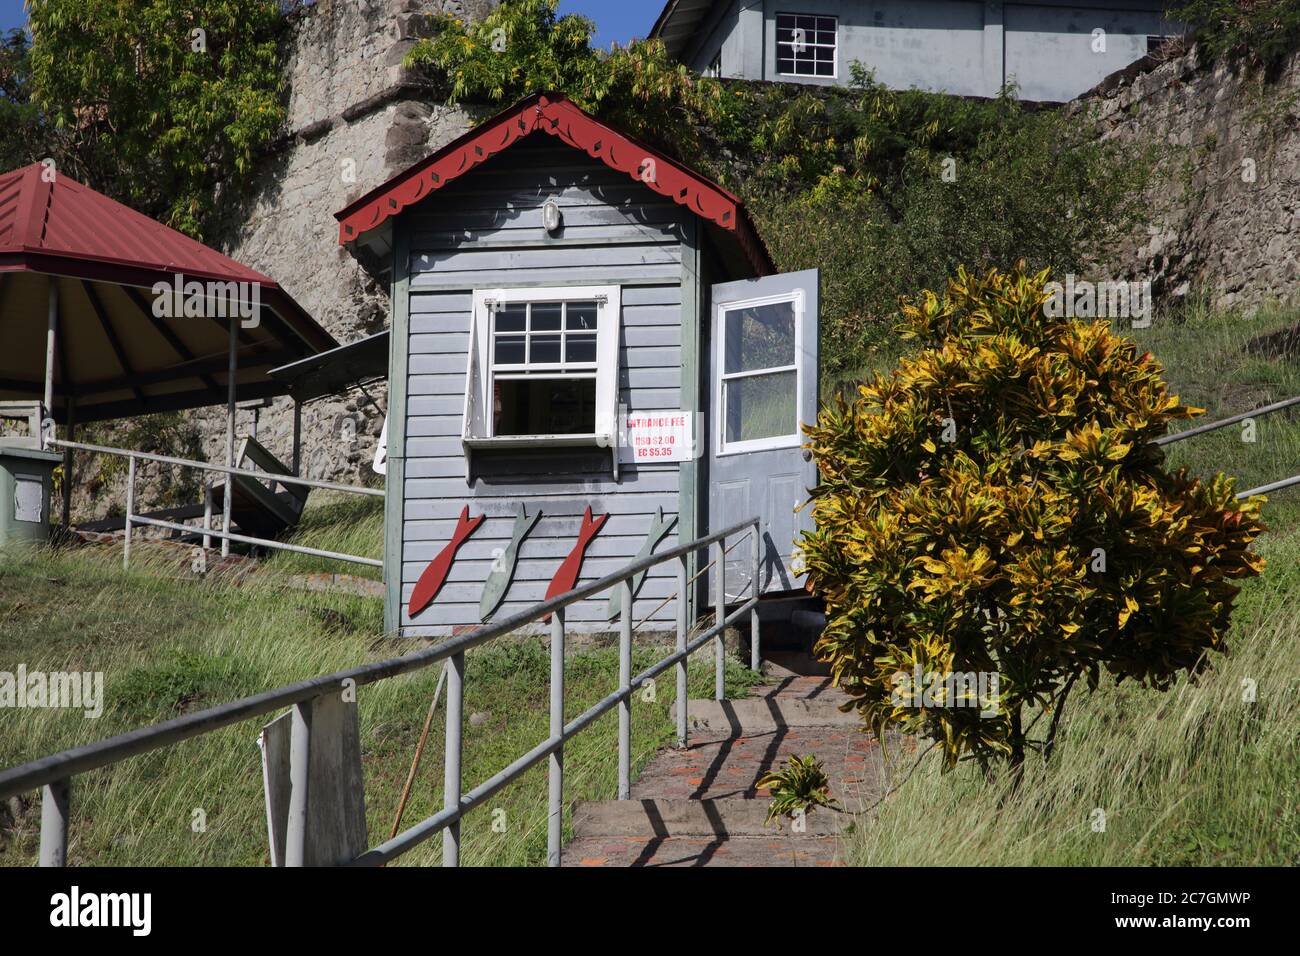 Fort George Grenada Entrance and ticket booth Stock Photo